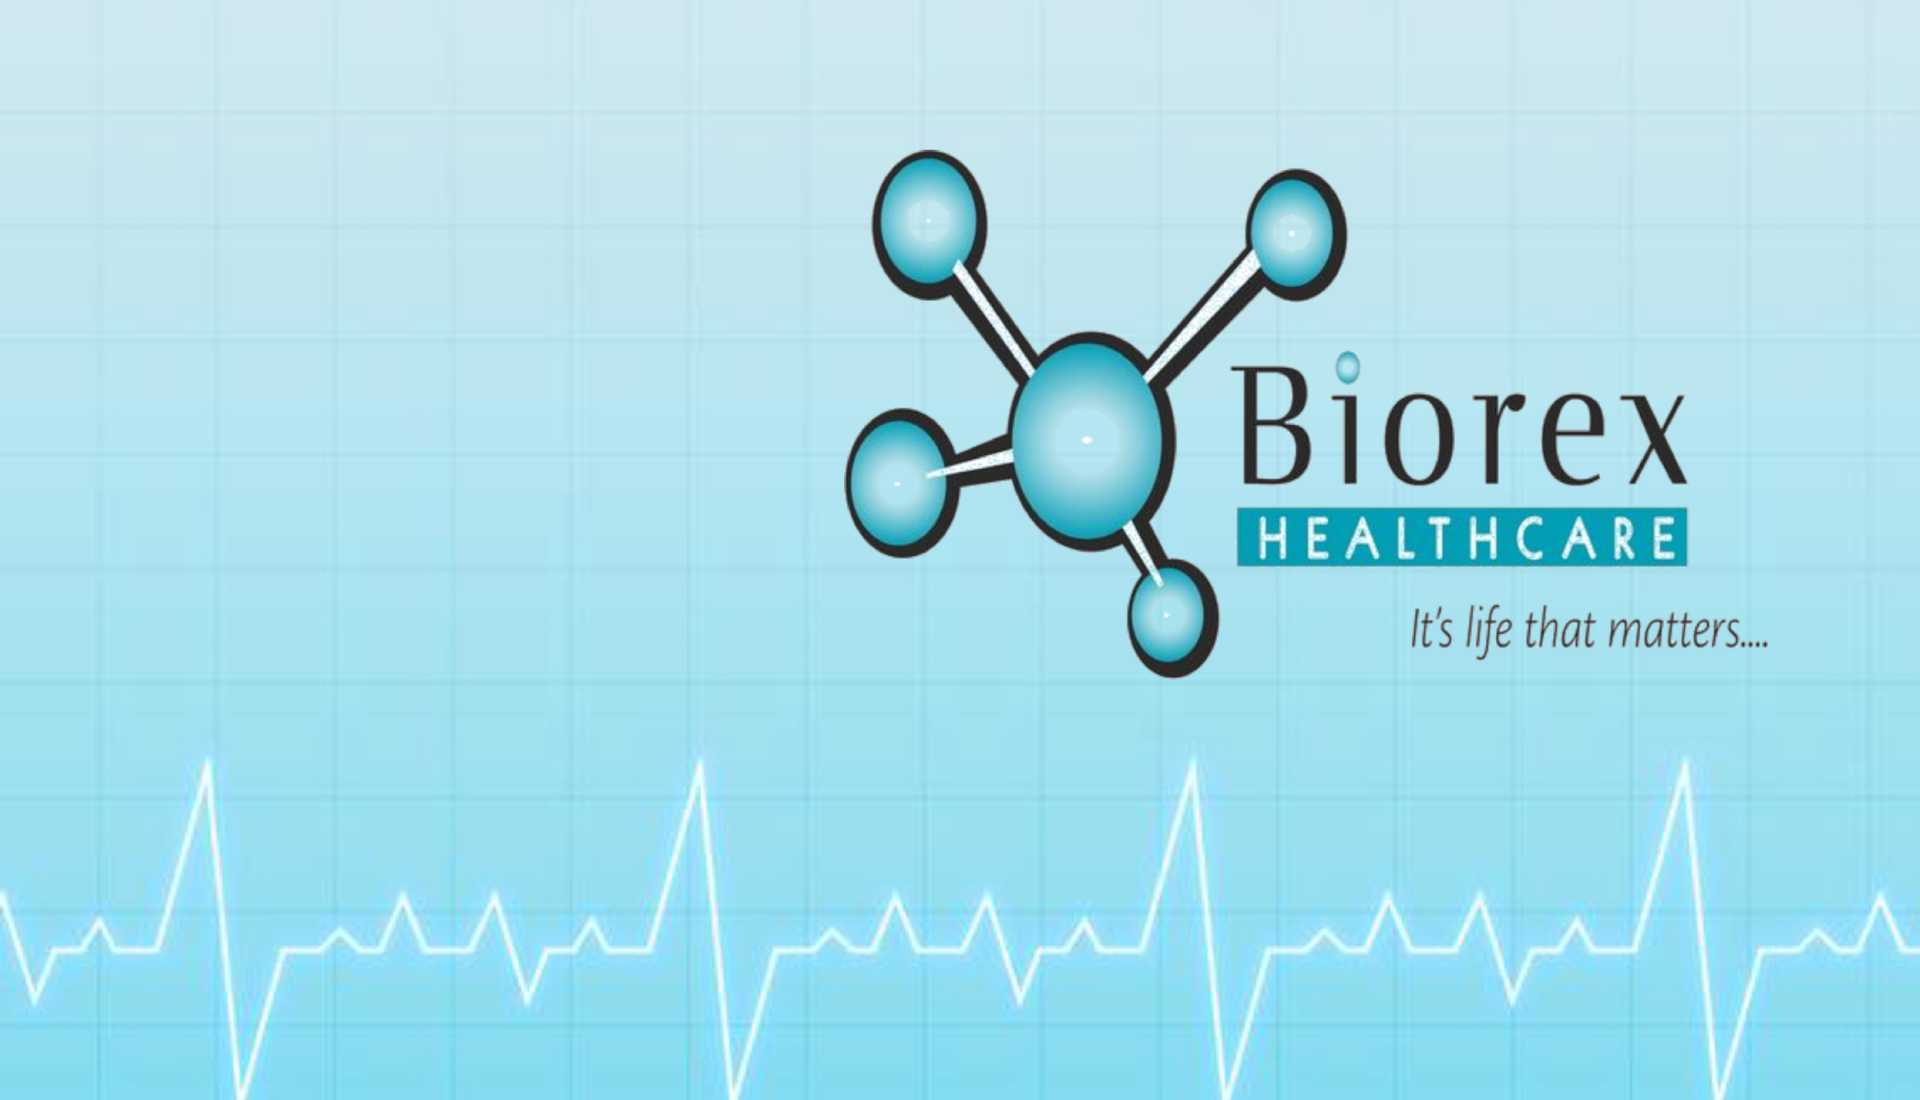 At Biorex, we are committed towards the overall health and well-being of people. Our customers and patients are at the heart of everything we do.